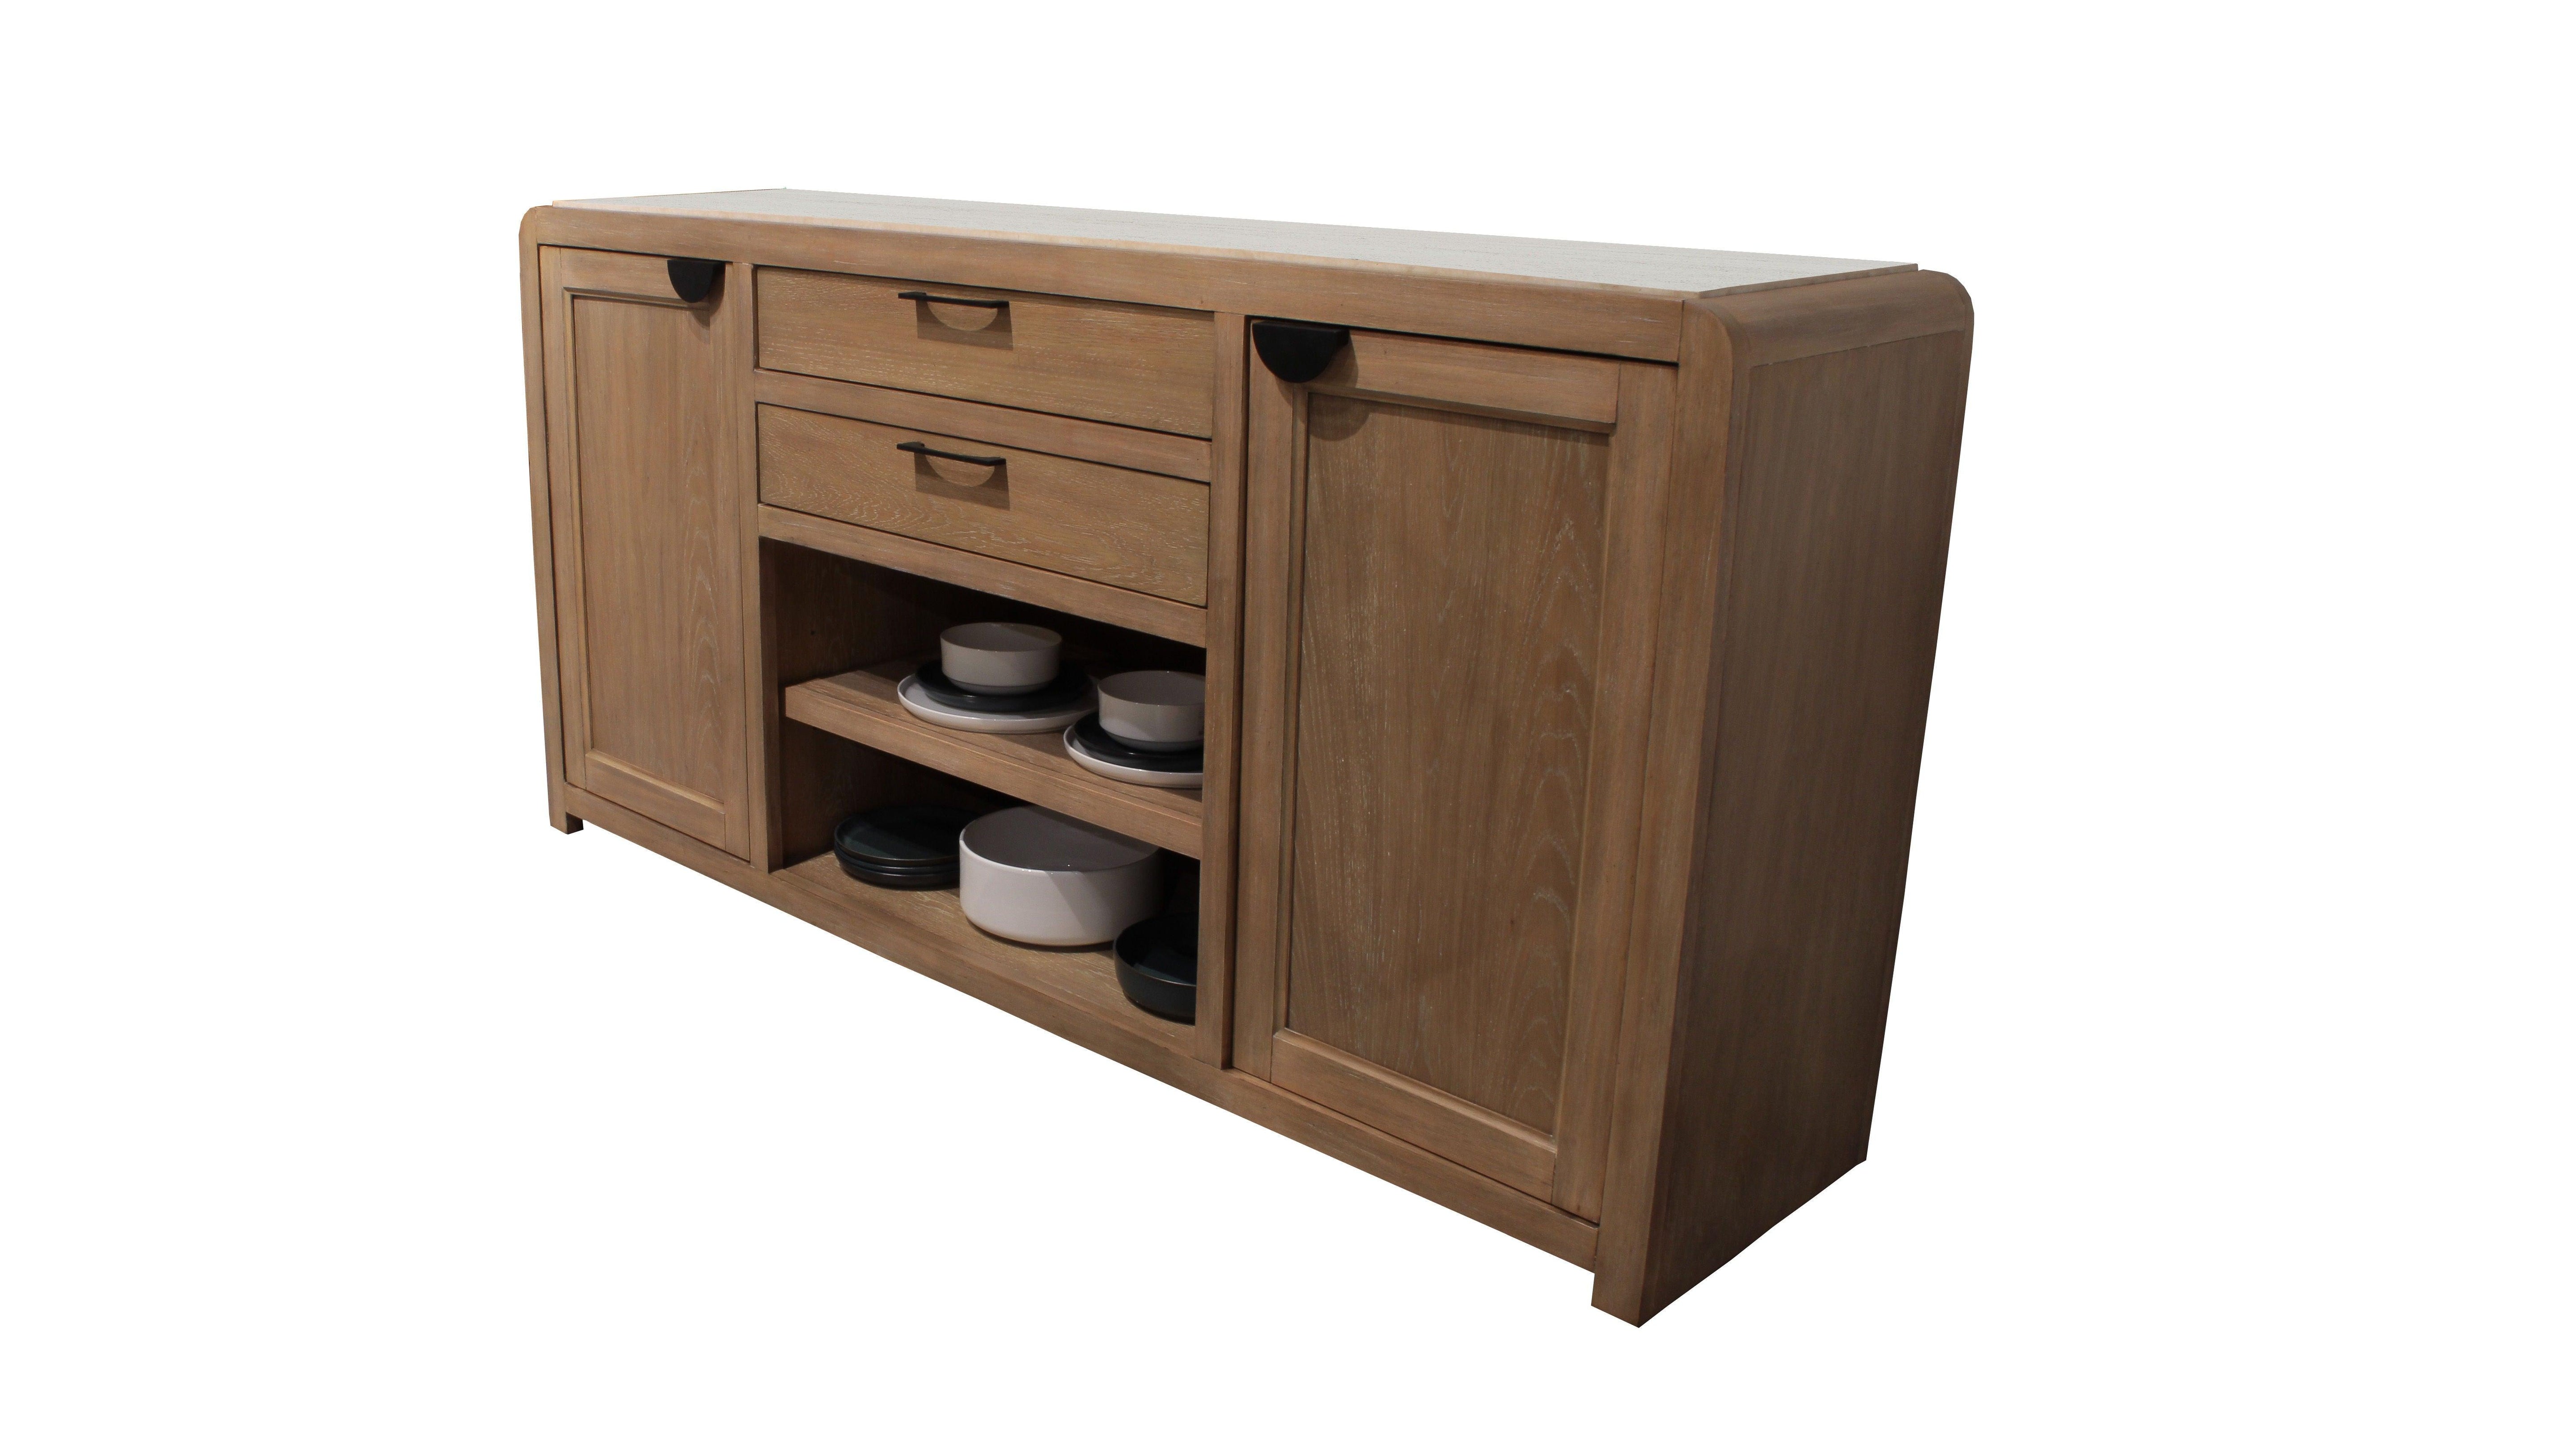 Parker House Furniture - Escape - Dining 72 In. Buffet Server With Stone Top - Glazed Natural Oak Natural Cane Vanilla Bean Stone - 5th Avenue Furniture